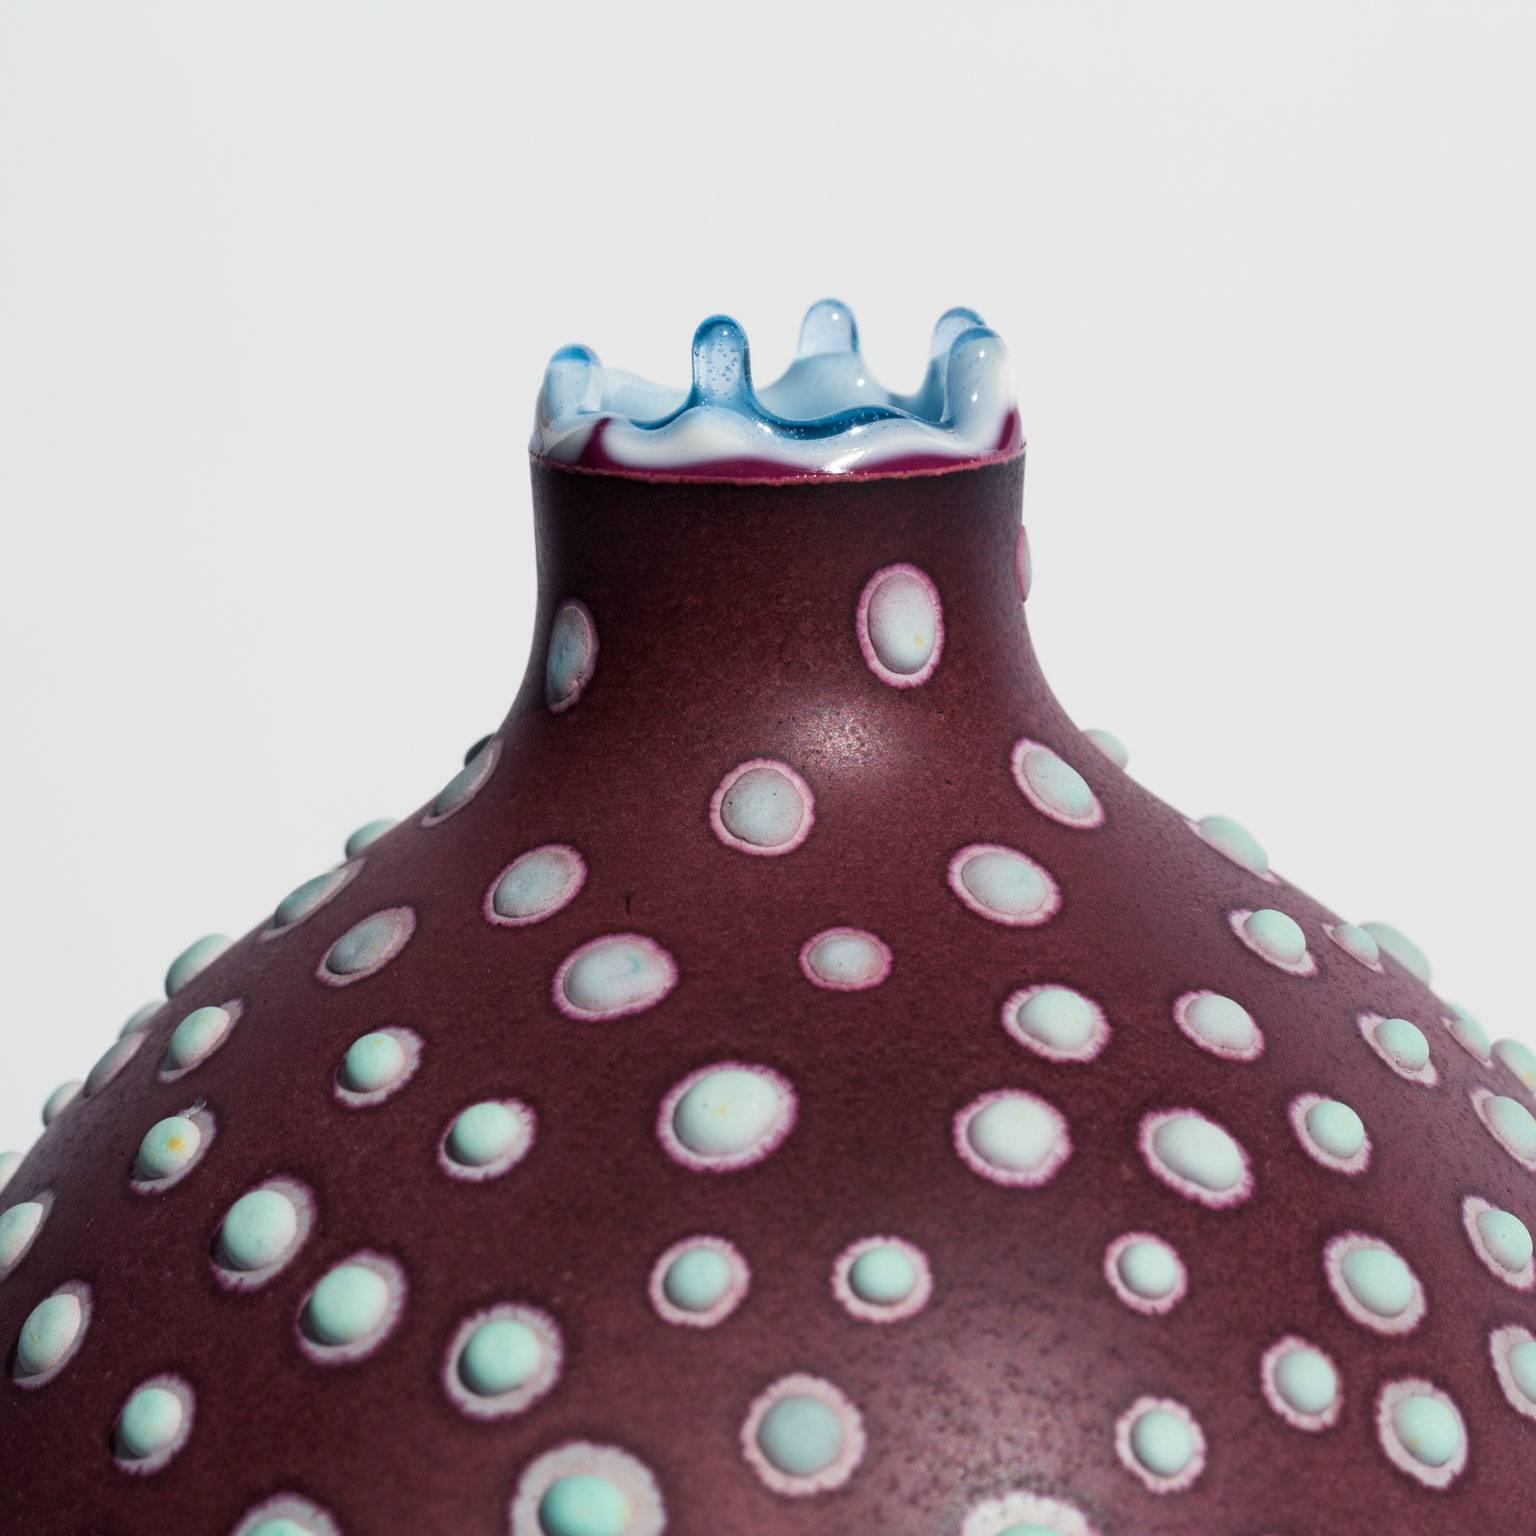 This unusual and playful one of a kind vase is handmade by artist Elyse Graham in her Los Angeles studio.

This collection of vessels is inspired by our incredible and diverse microbiome.

The artist is known for her striking color palette and